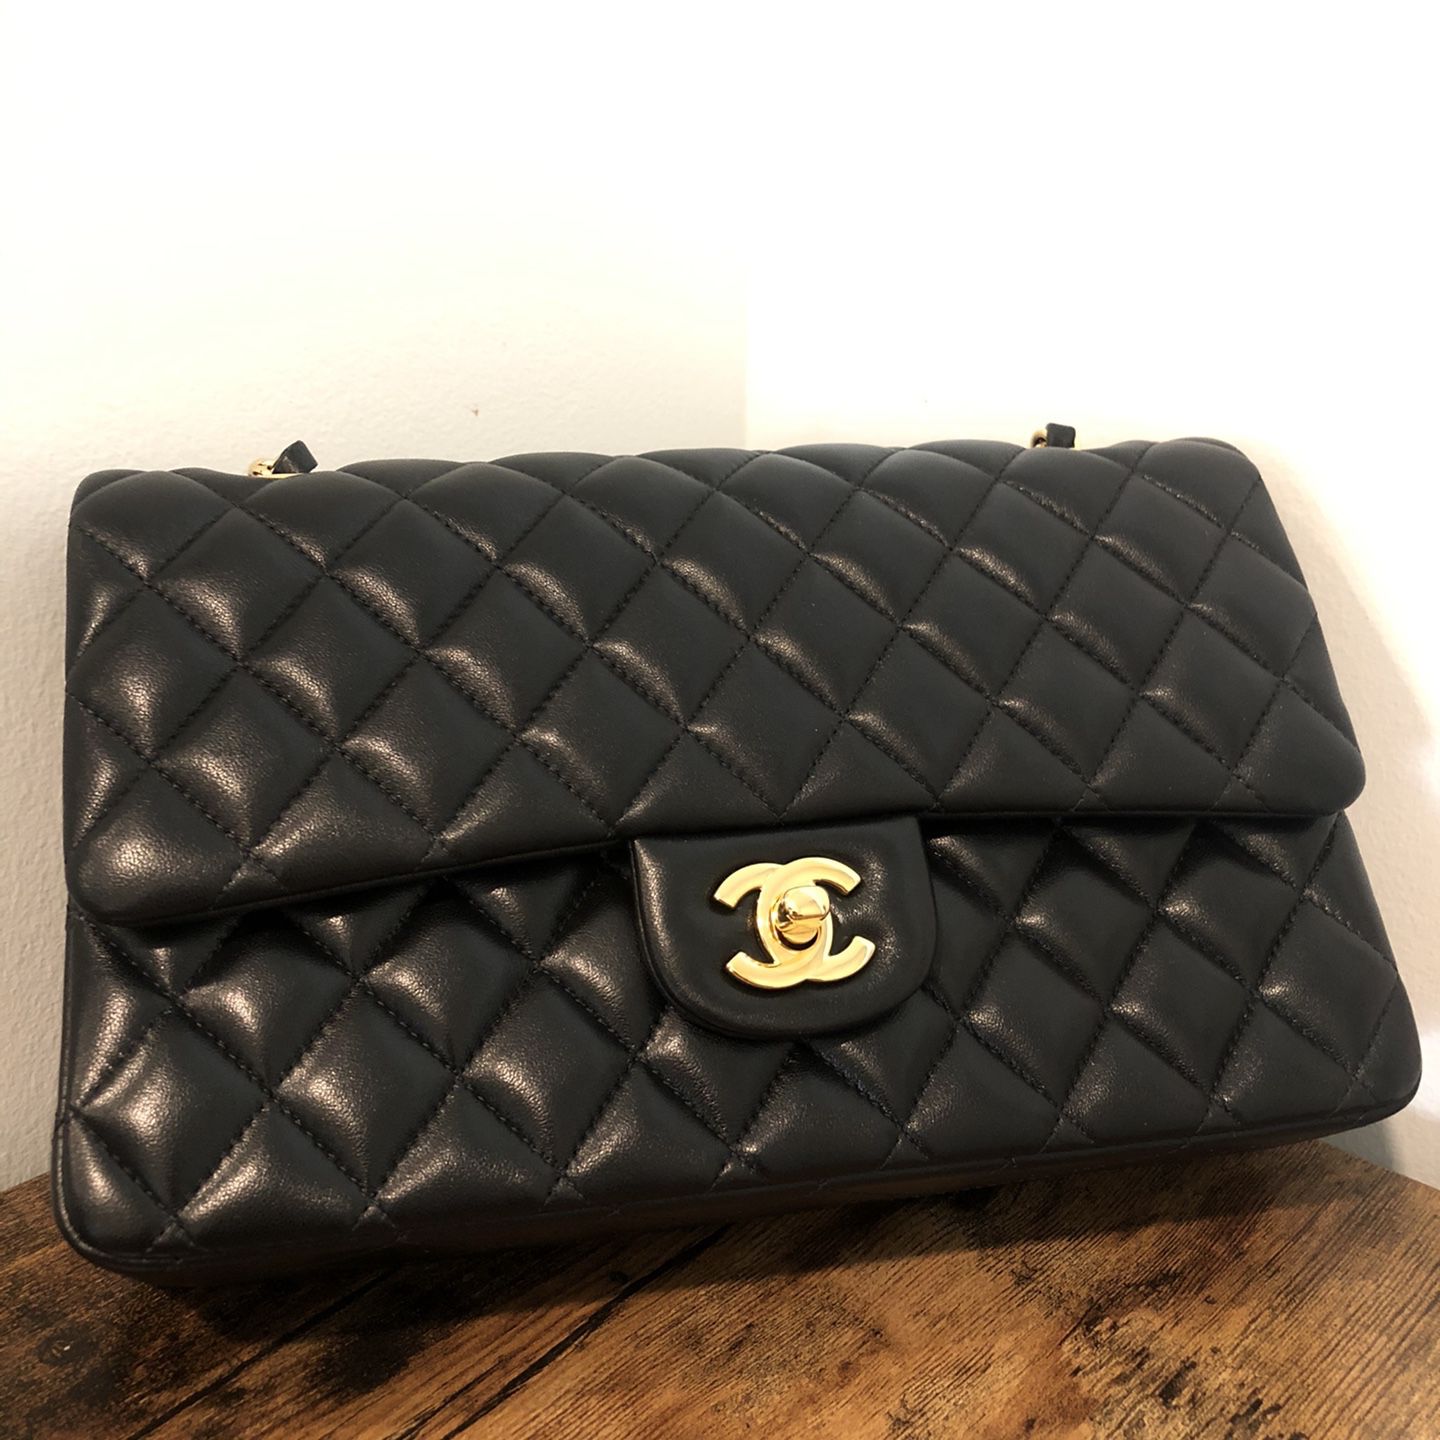 Chanel Lamb Skin Cream/nude Flap Bag for Sale in Los Angeles, CA - OfferUp